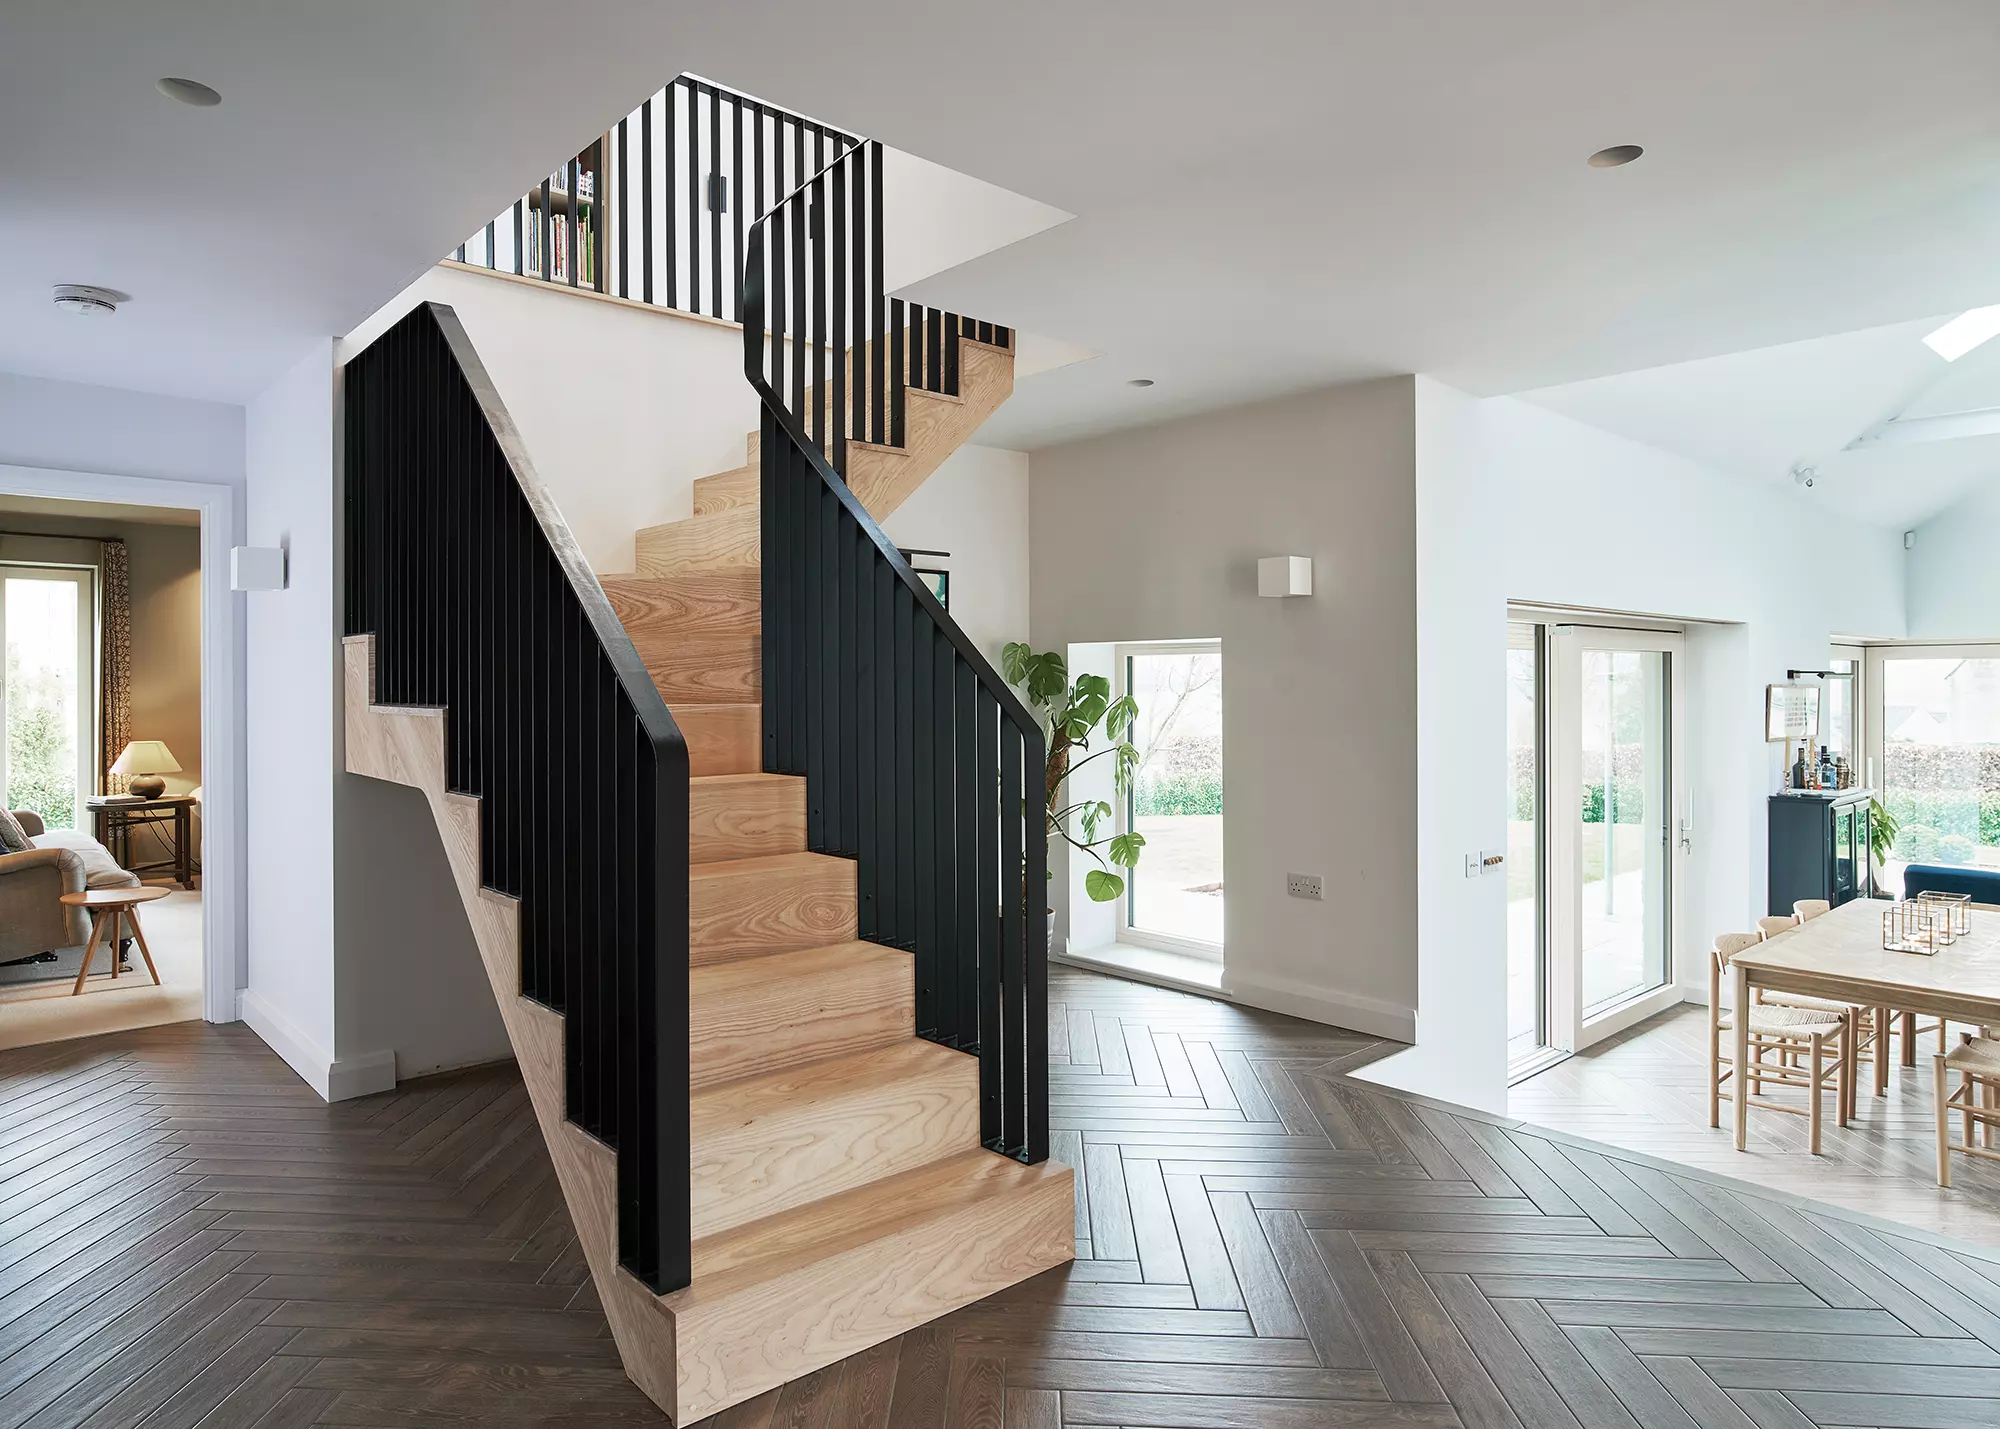 20 Staircase Design Ideas: Plan & Design Your Perfect Staircase - Build It